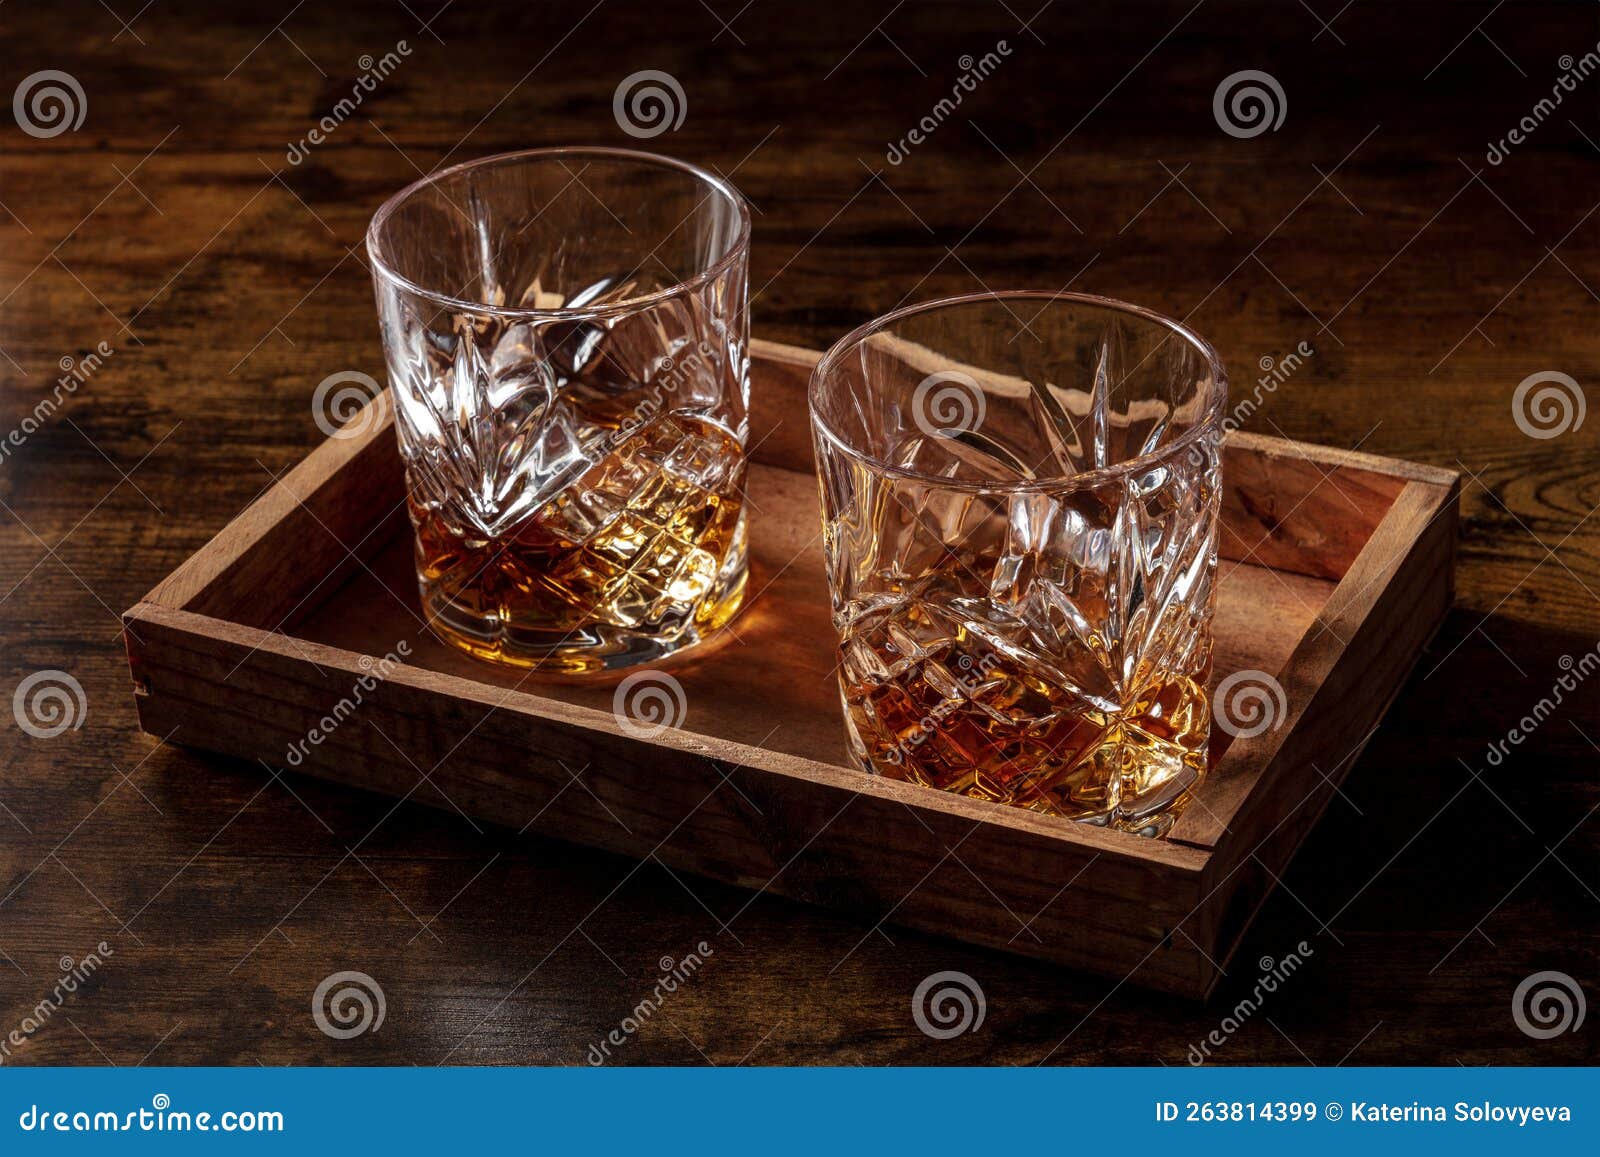 whiskey in glasses with ice. bourbon whisky on rocks on a dark rustic background